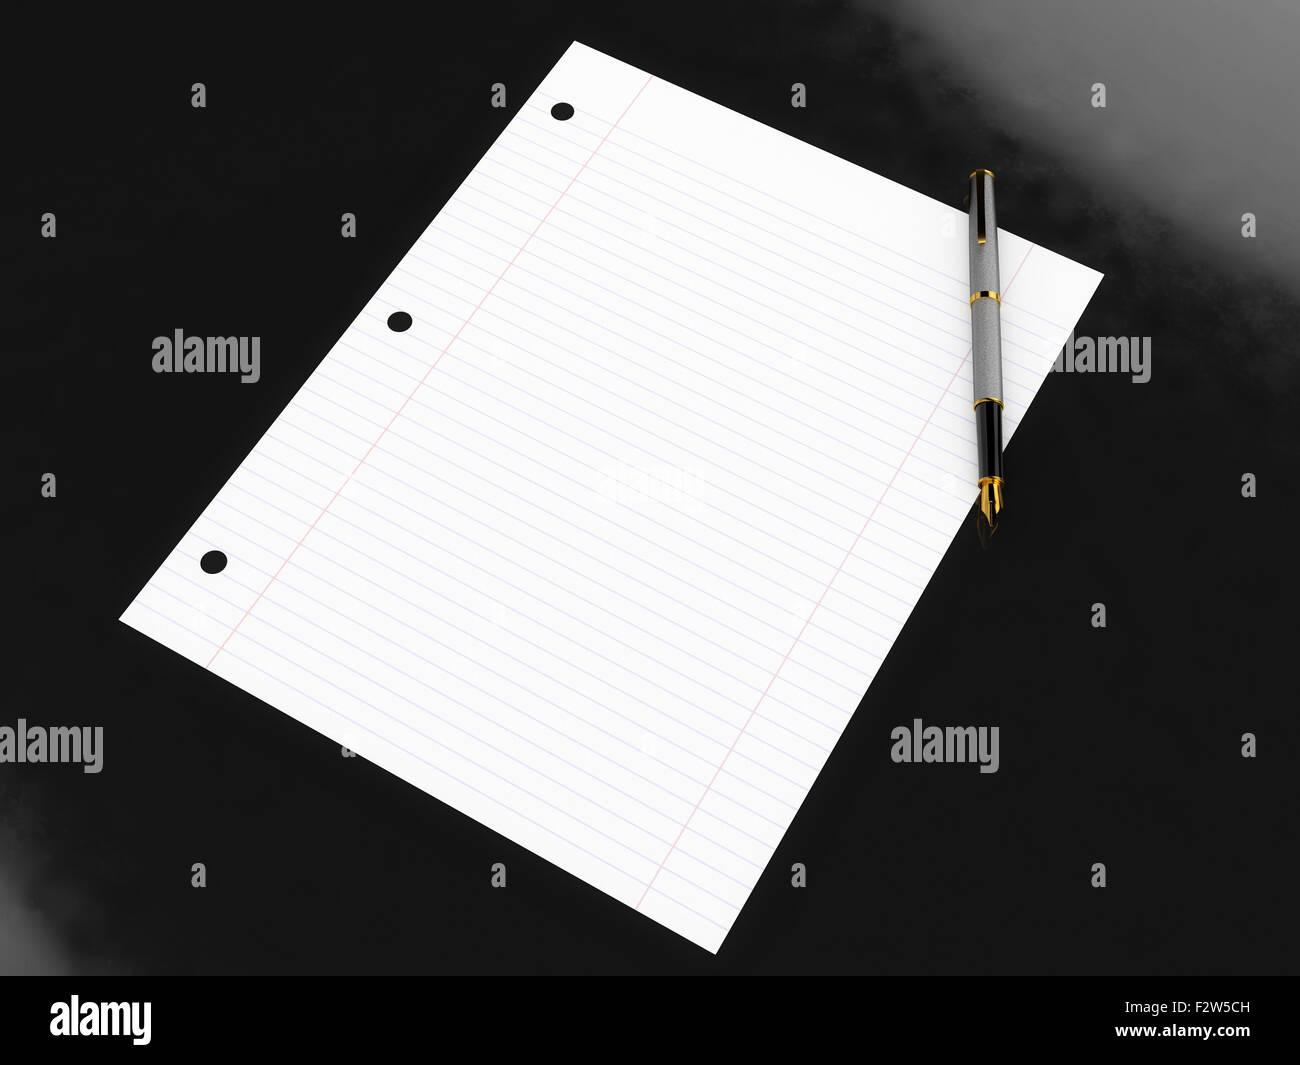 Blank lined paper and high end pen on glossy black surface Stock Photo